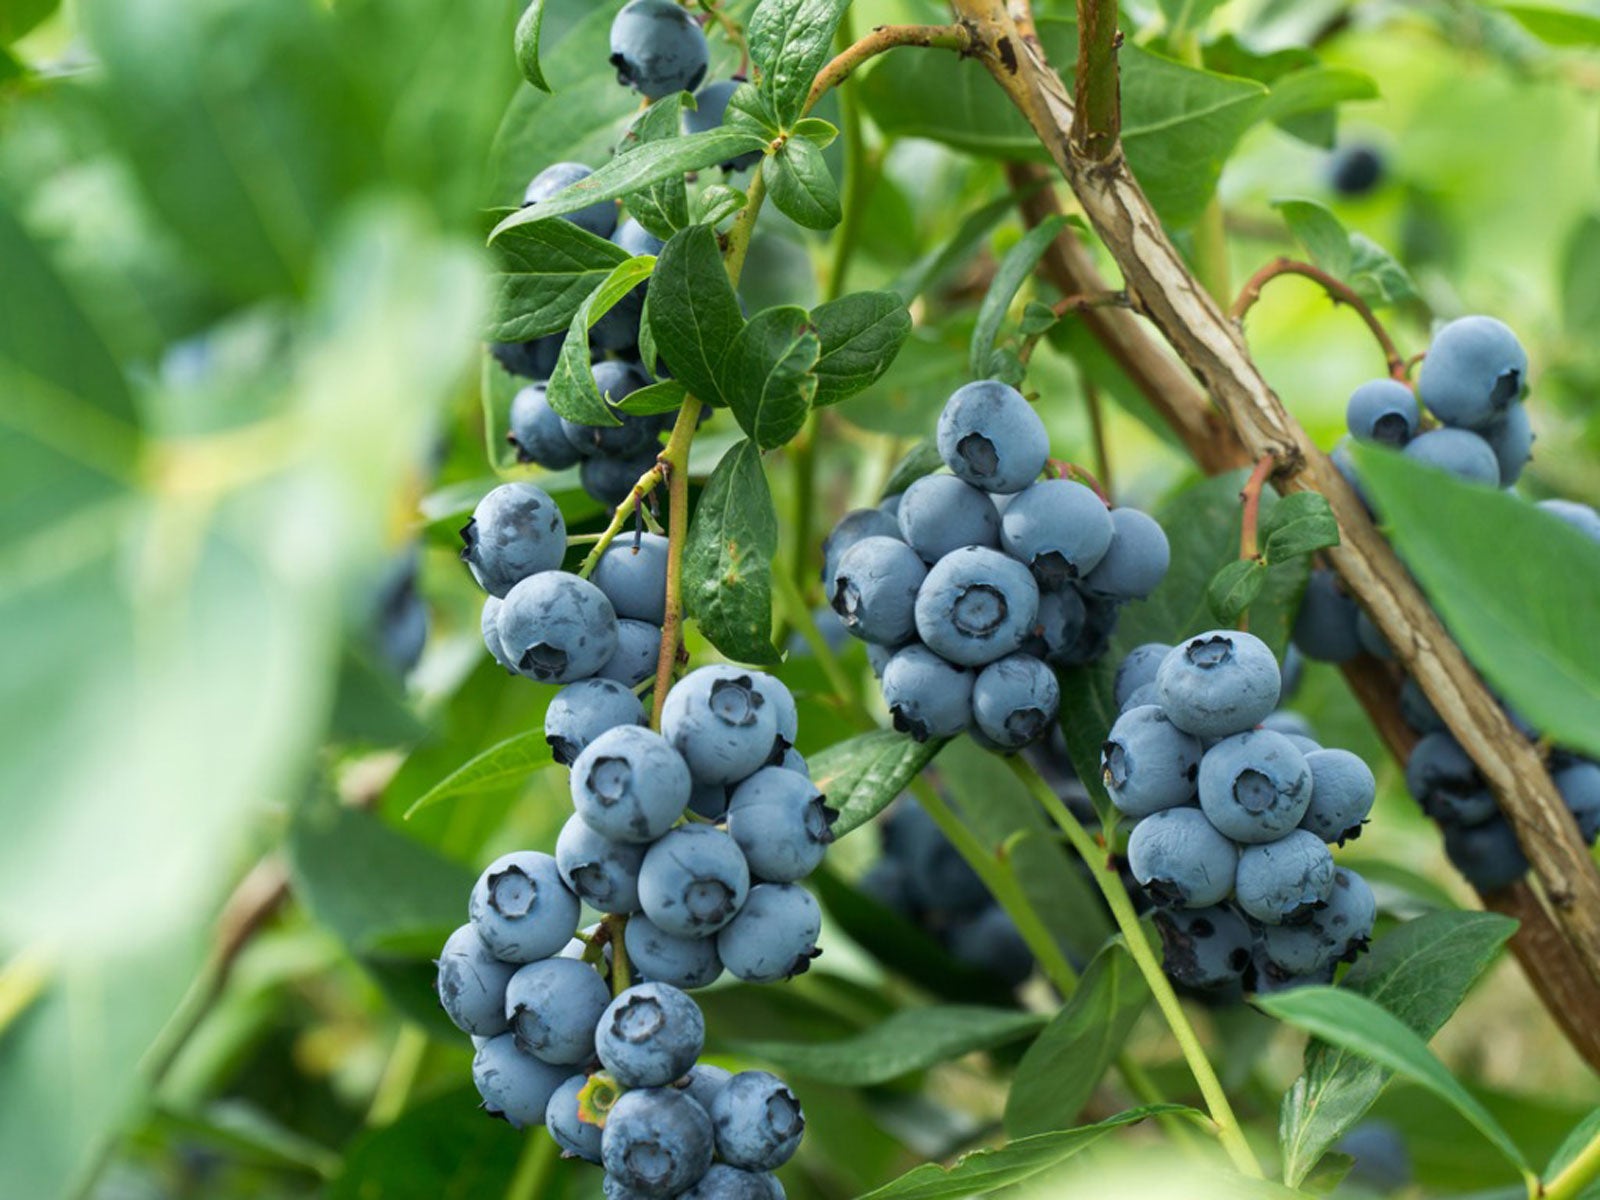 Growing Blueberry Bushes   Tips For Blueberry Plant Care